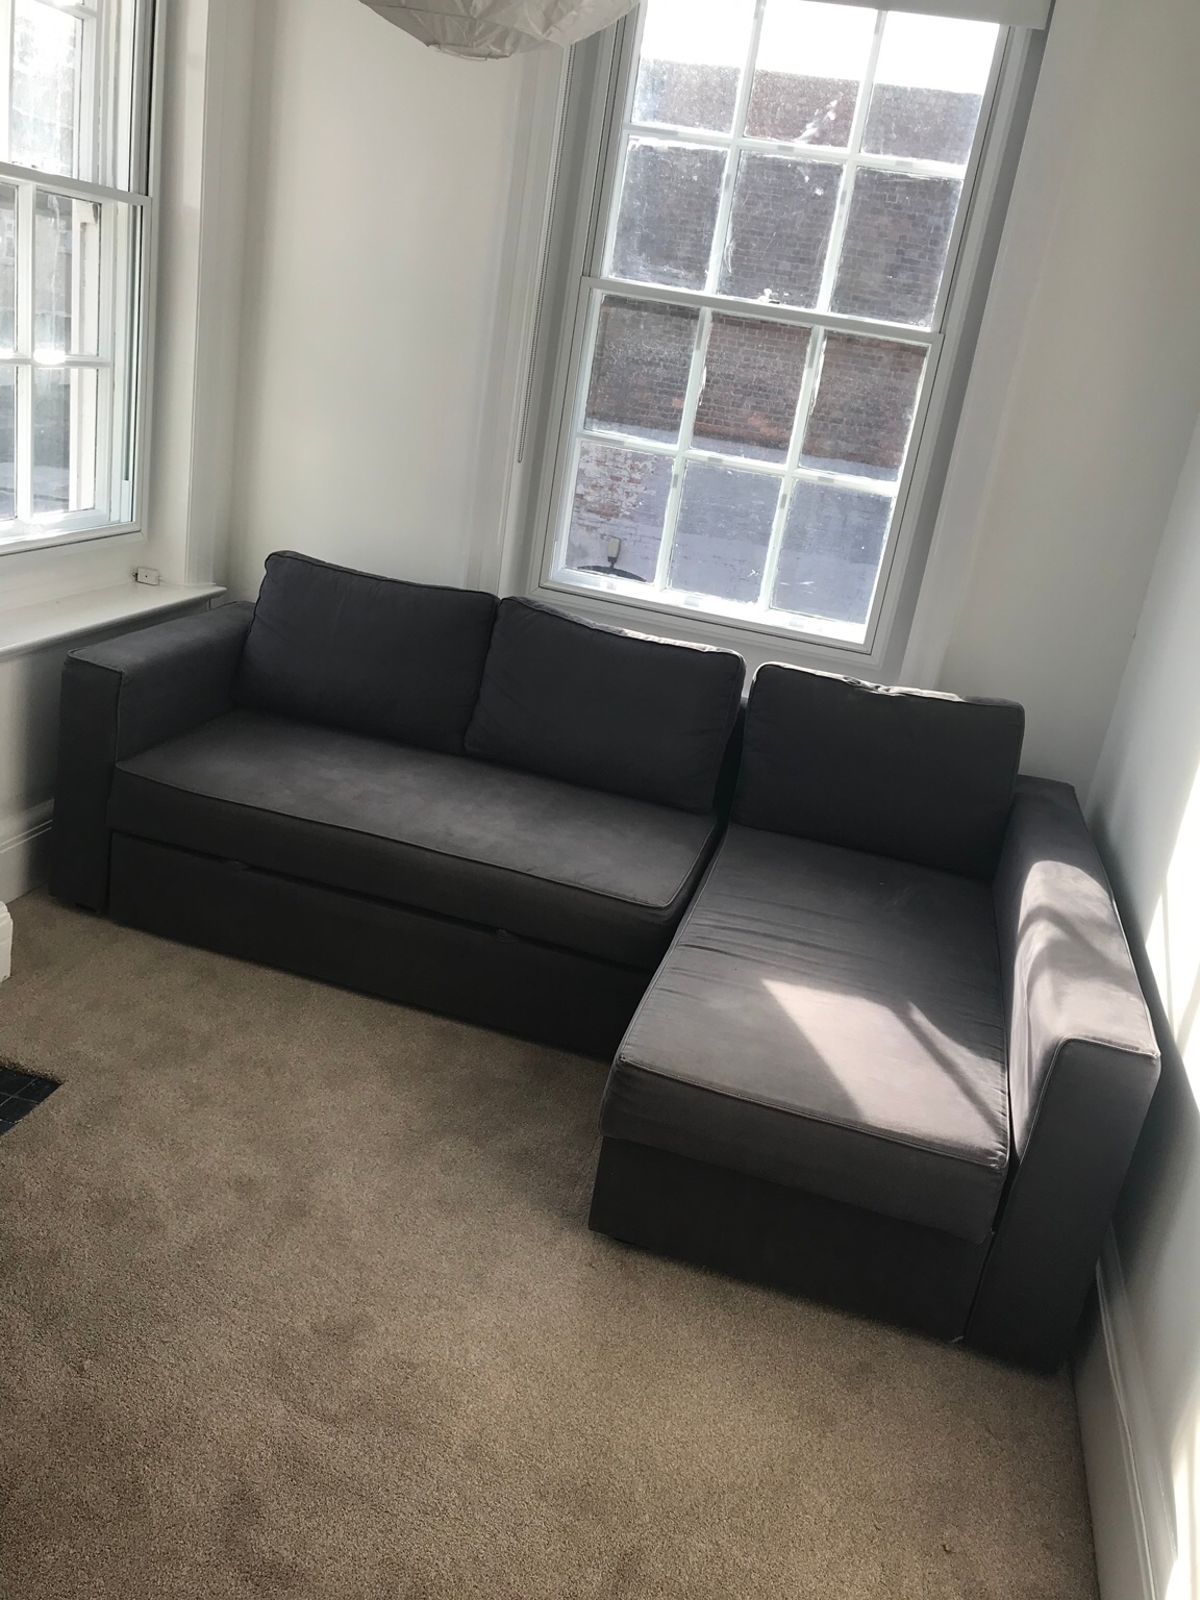 IKEA sleeper pull out sectional sofa couch